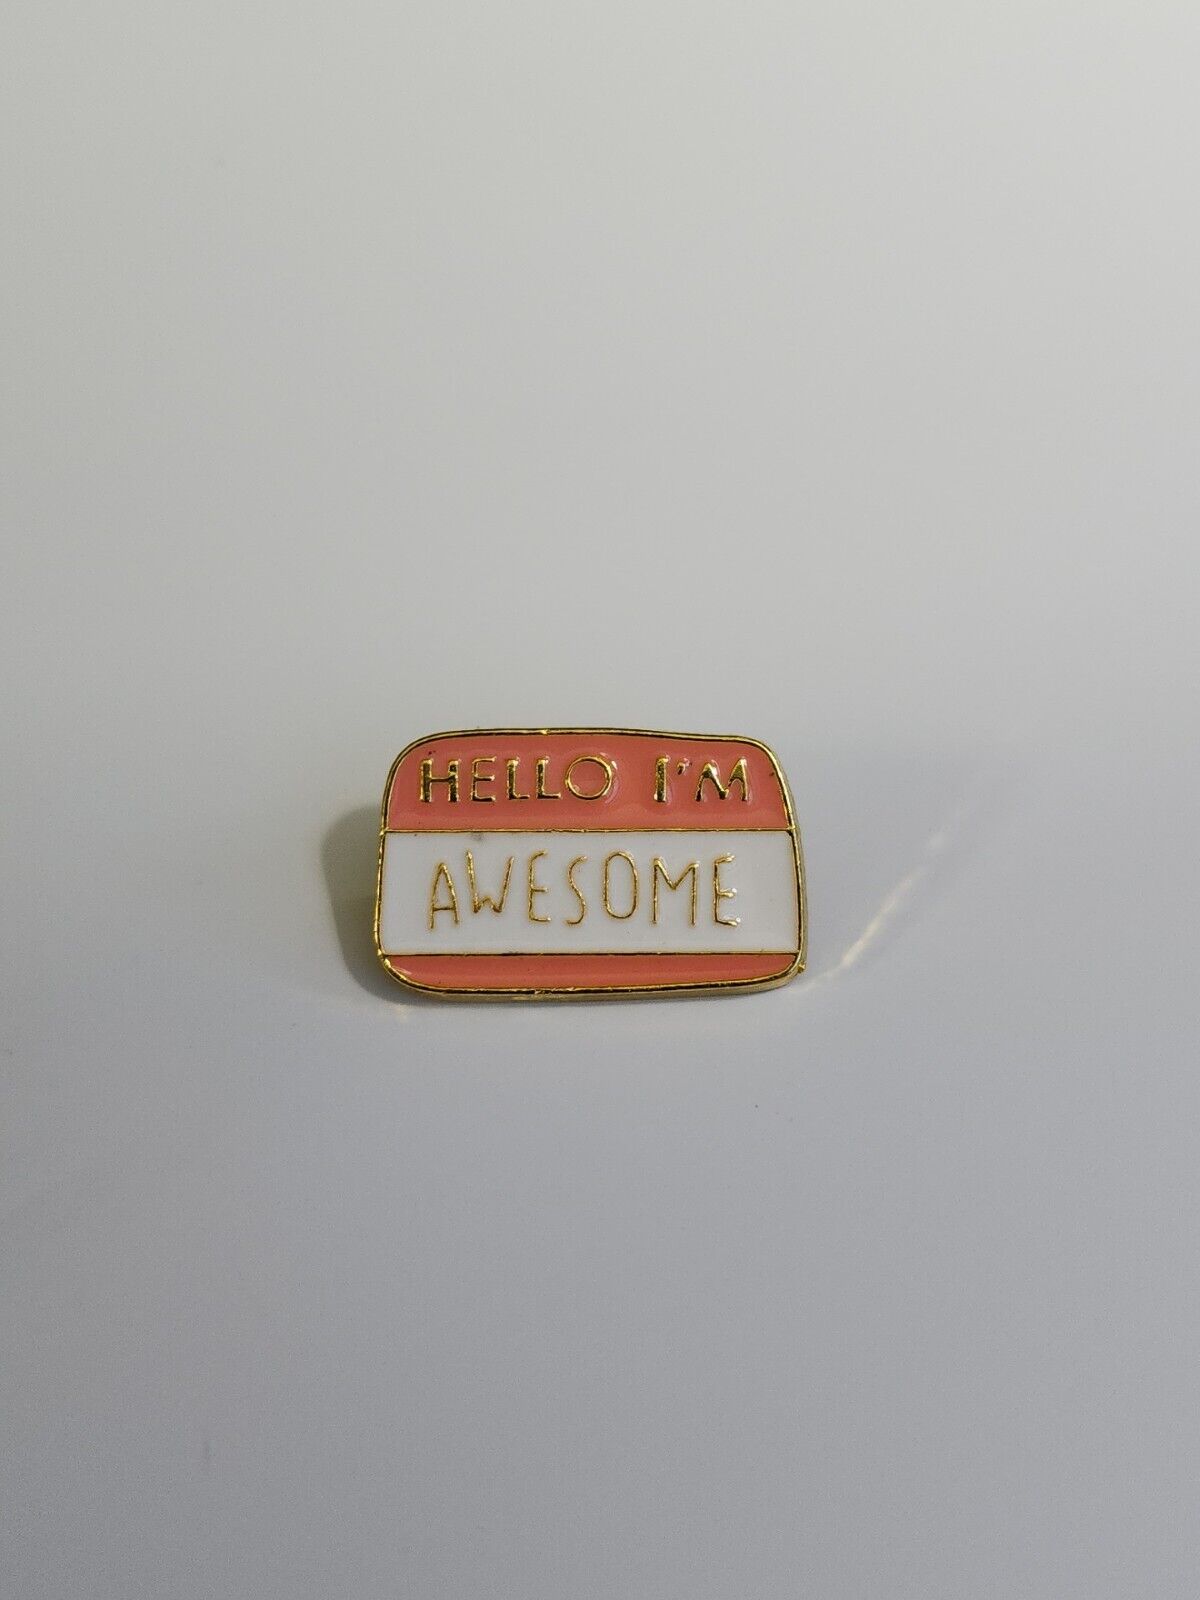 Hello I'm Awesome Name Tag Lapel Pin Humorous Small Size 